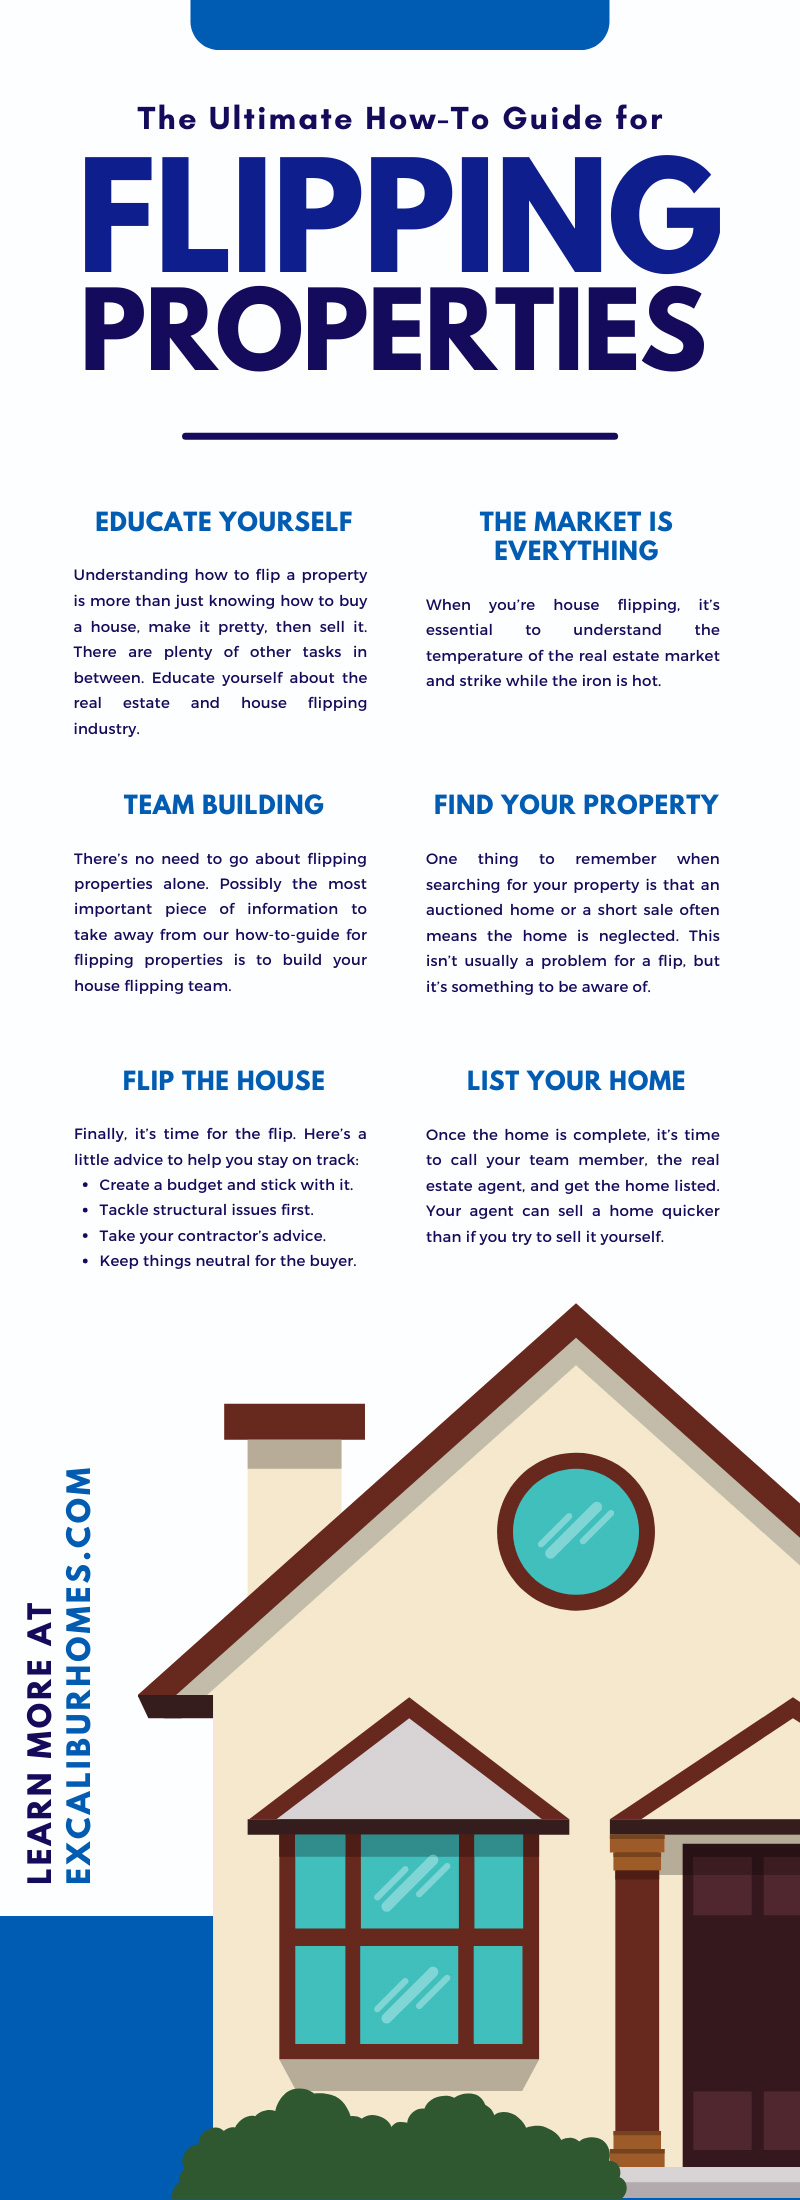 The Ultimate How-To Guide for Flipping Properties